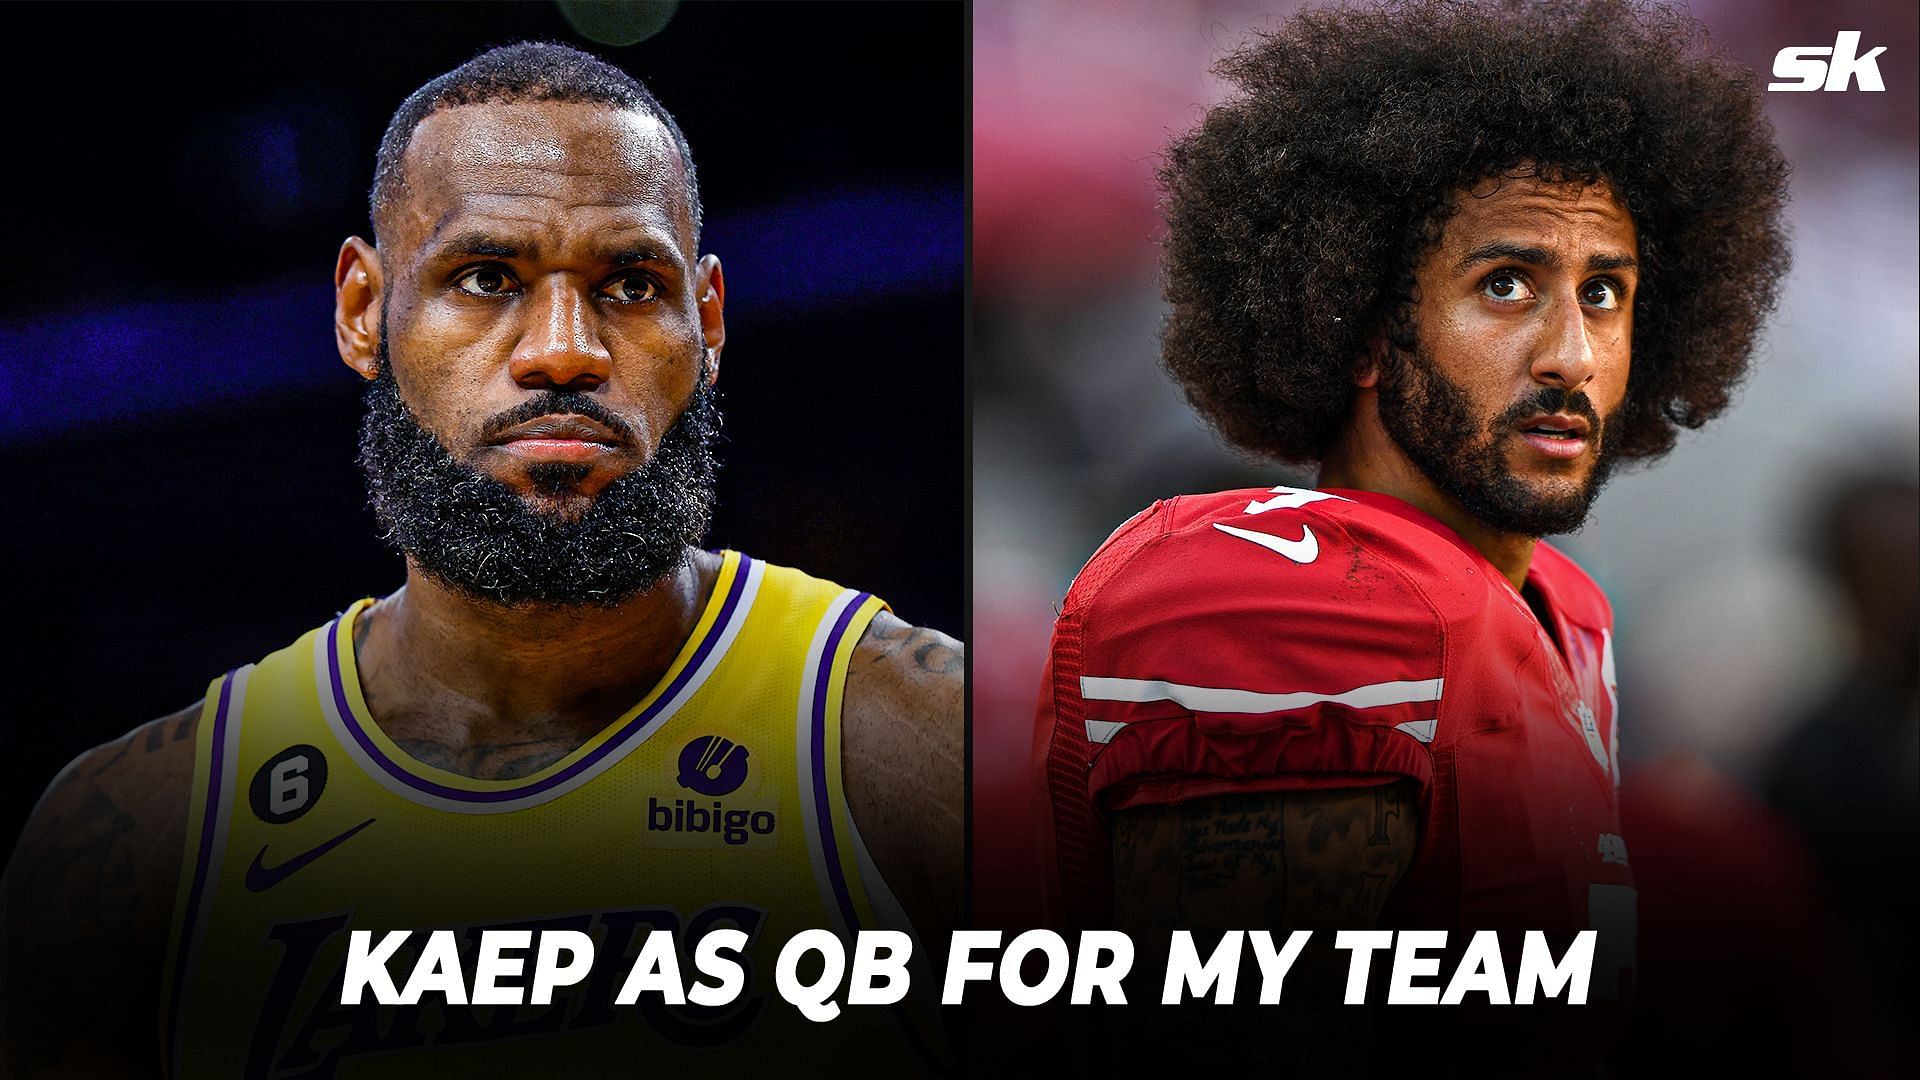 When LeBron James planned to sign Colin Kaepernick despite controversies in 2017